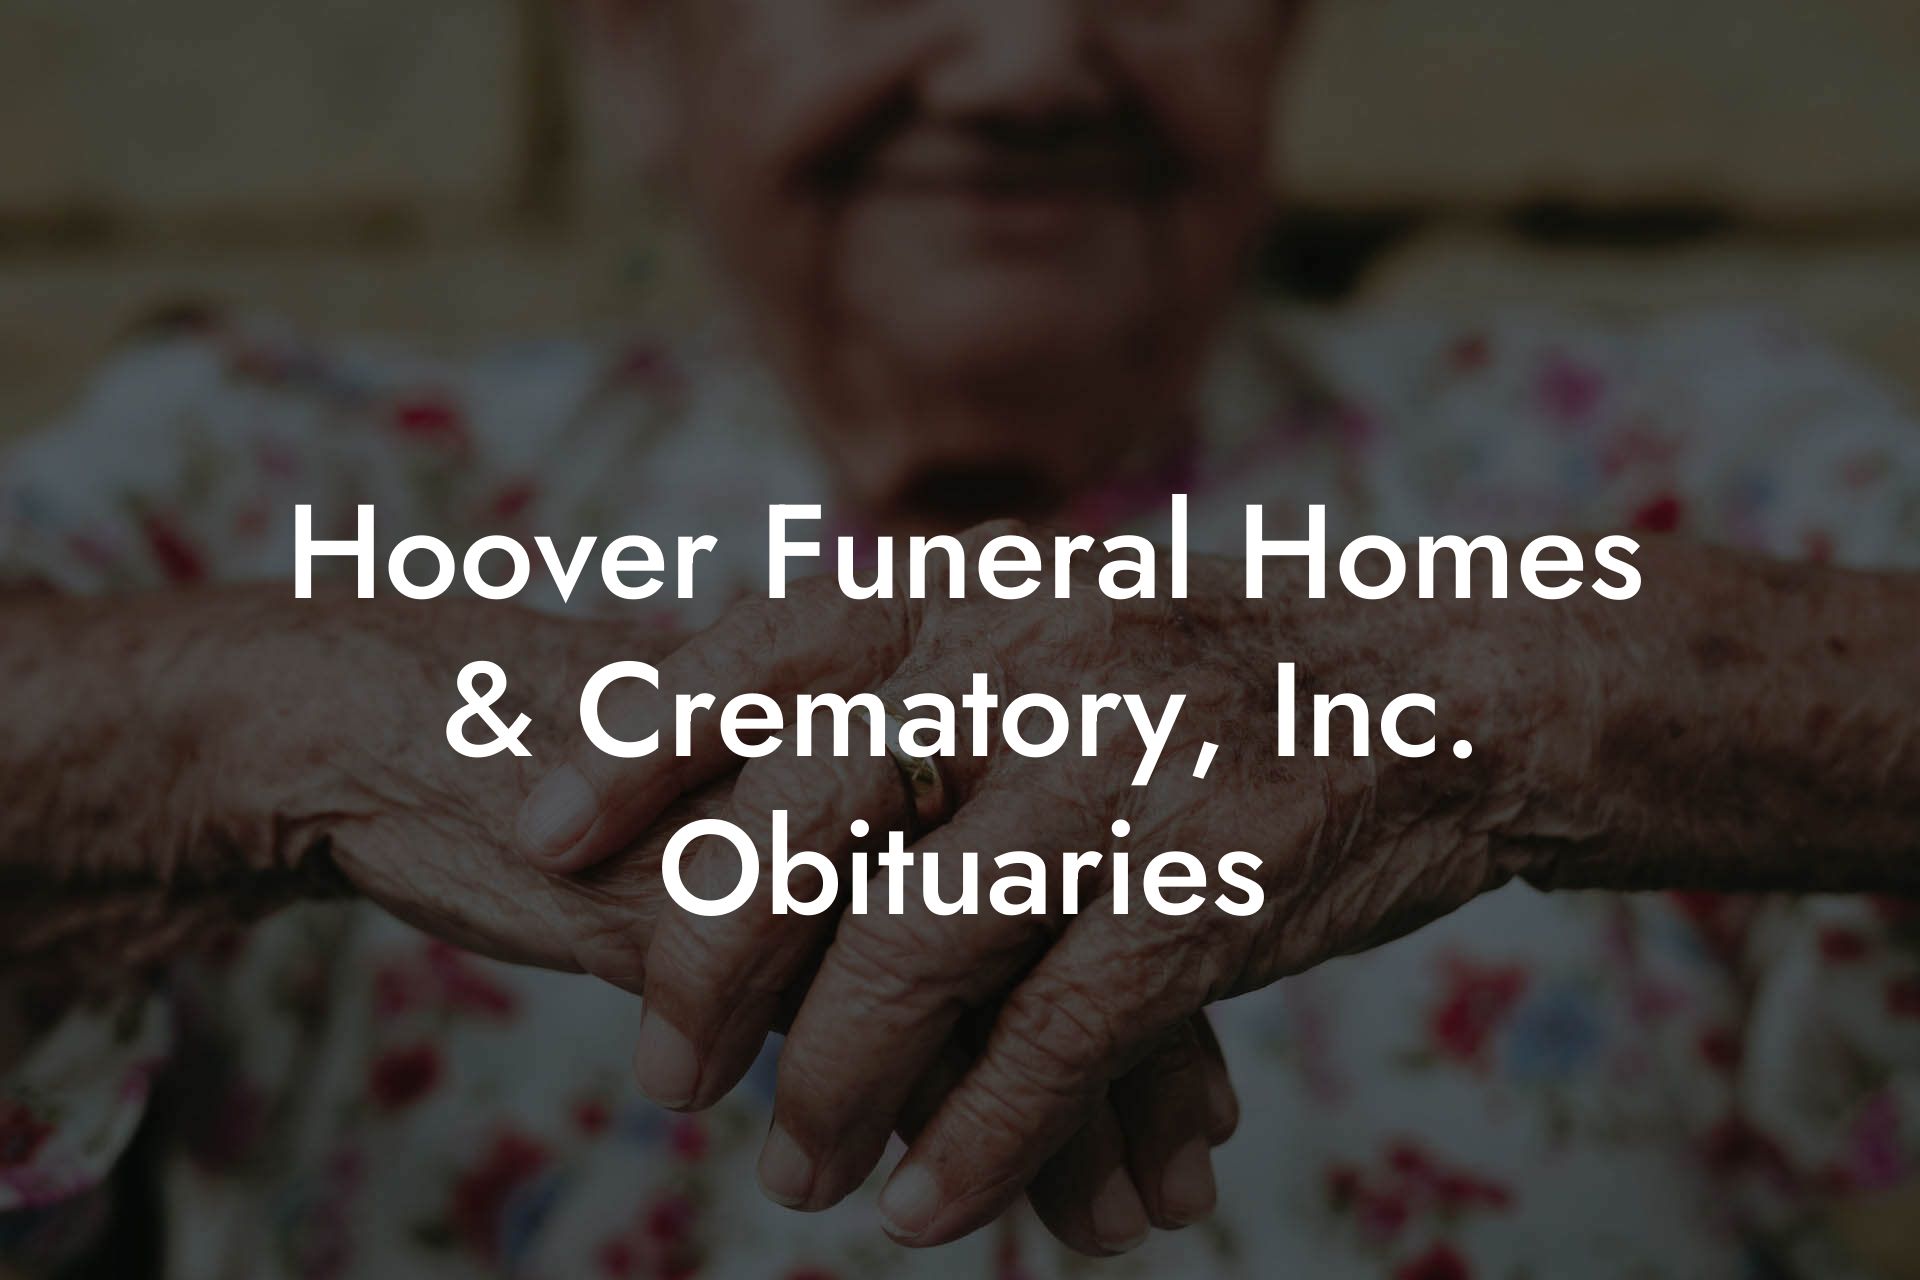 Hoover Funeral Homes & Crematory, Inc. Obituaries